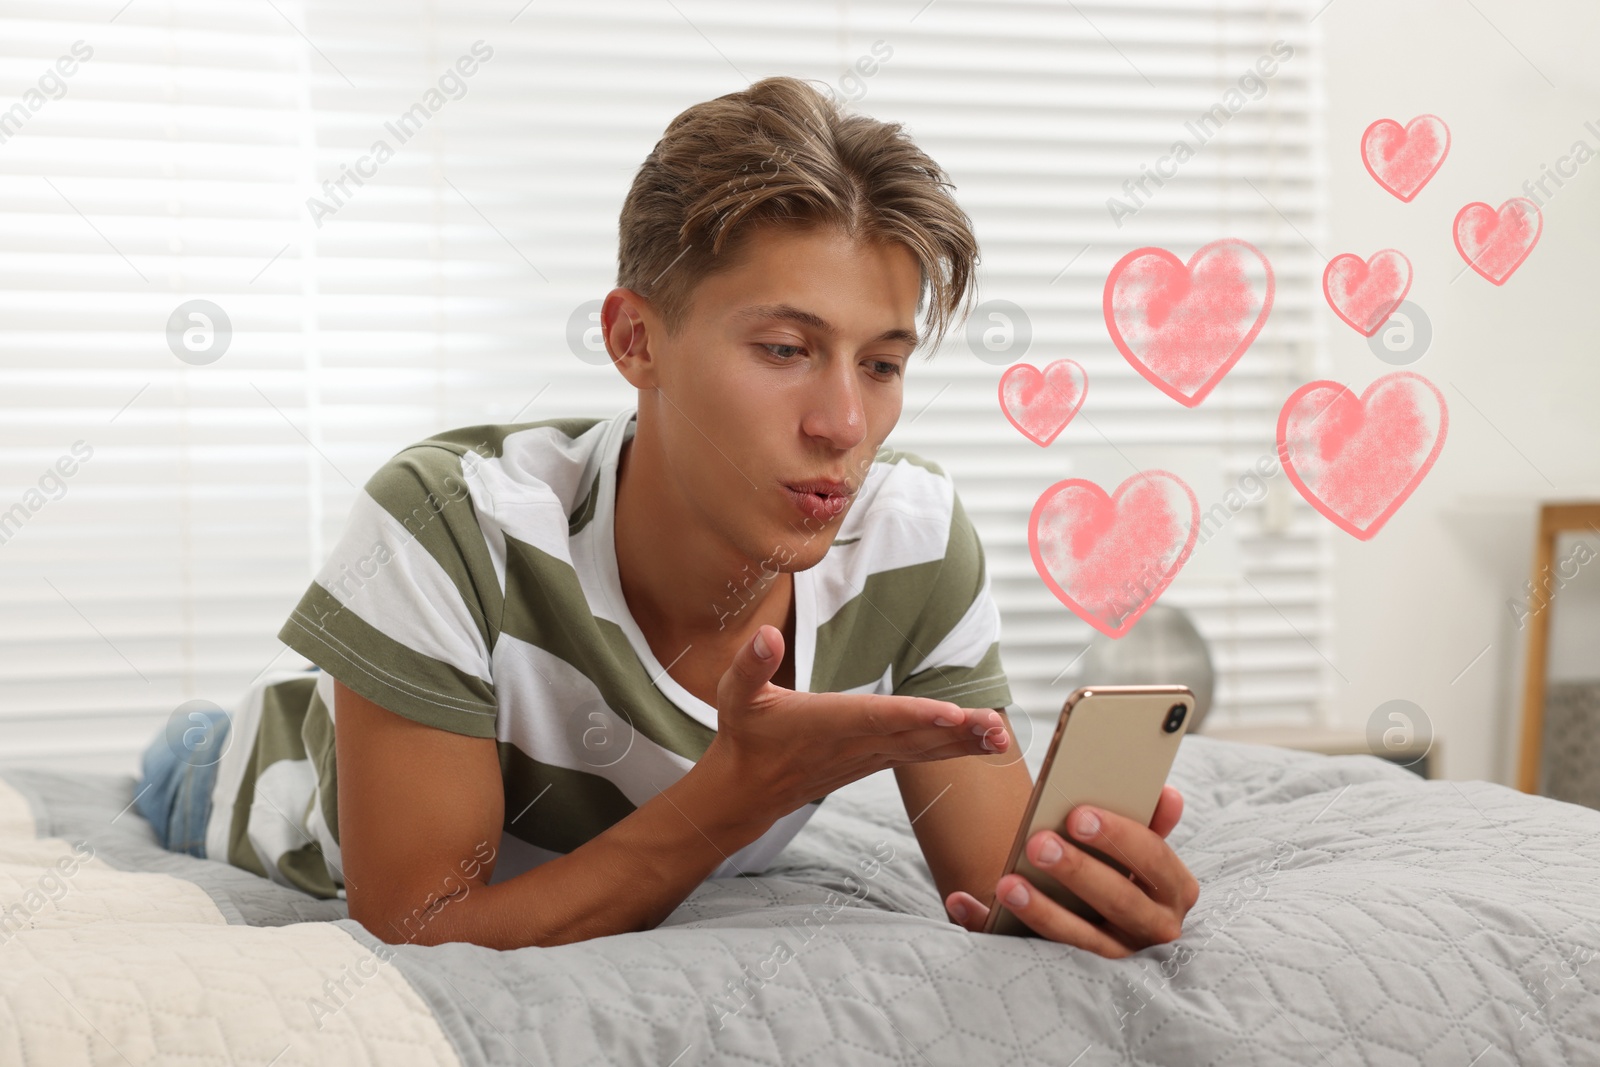 Image of Long distance relationship. Young man sending air kiss to his loved one via video chat indoors. Pink hearts near him